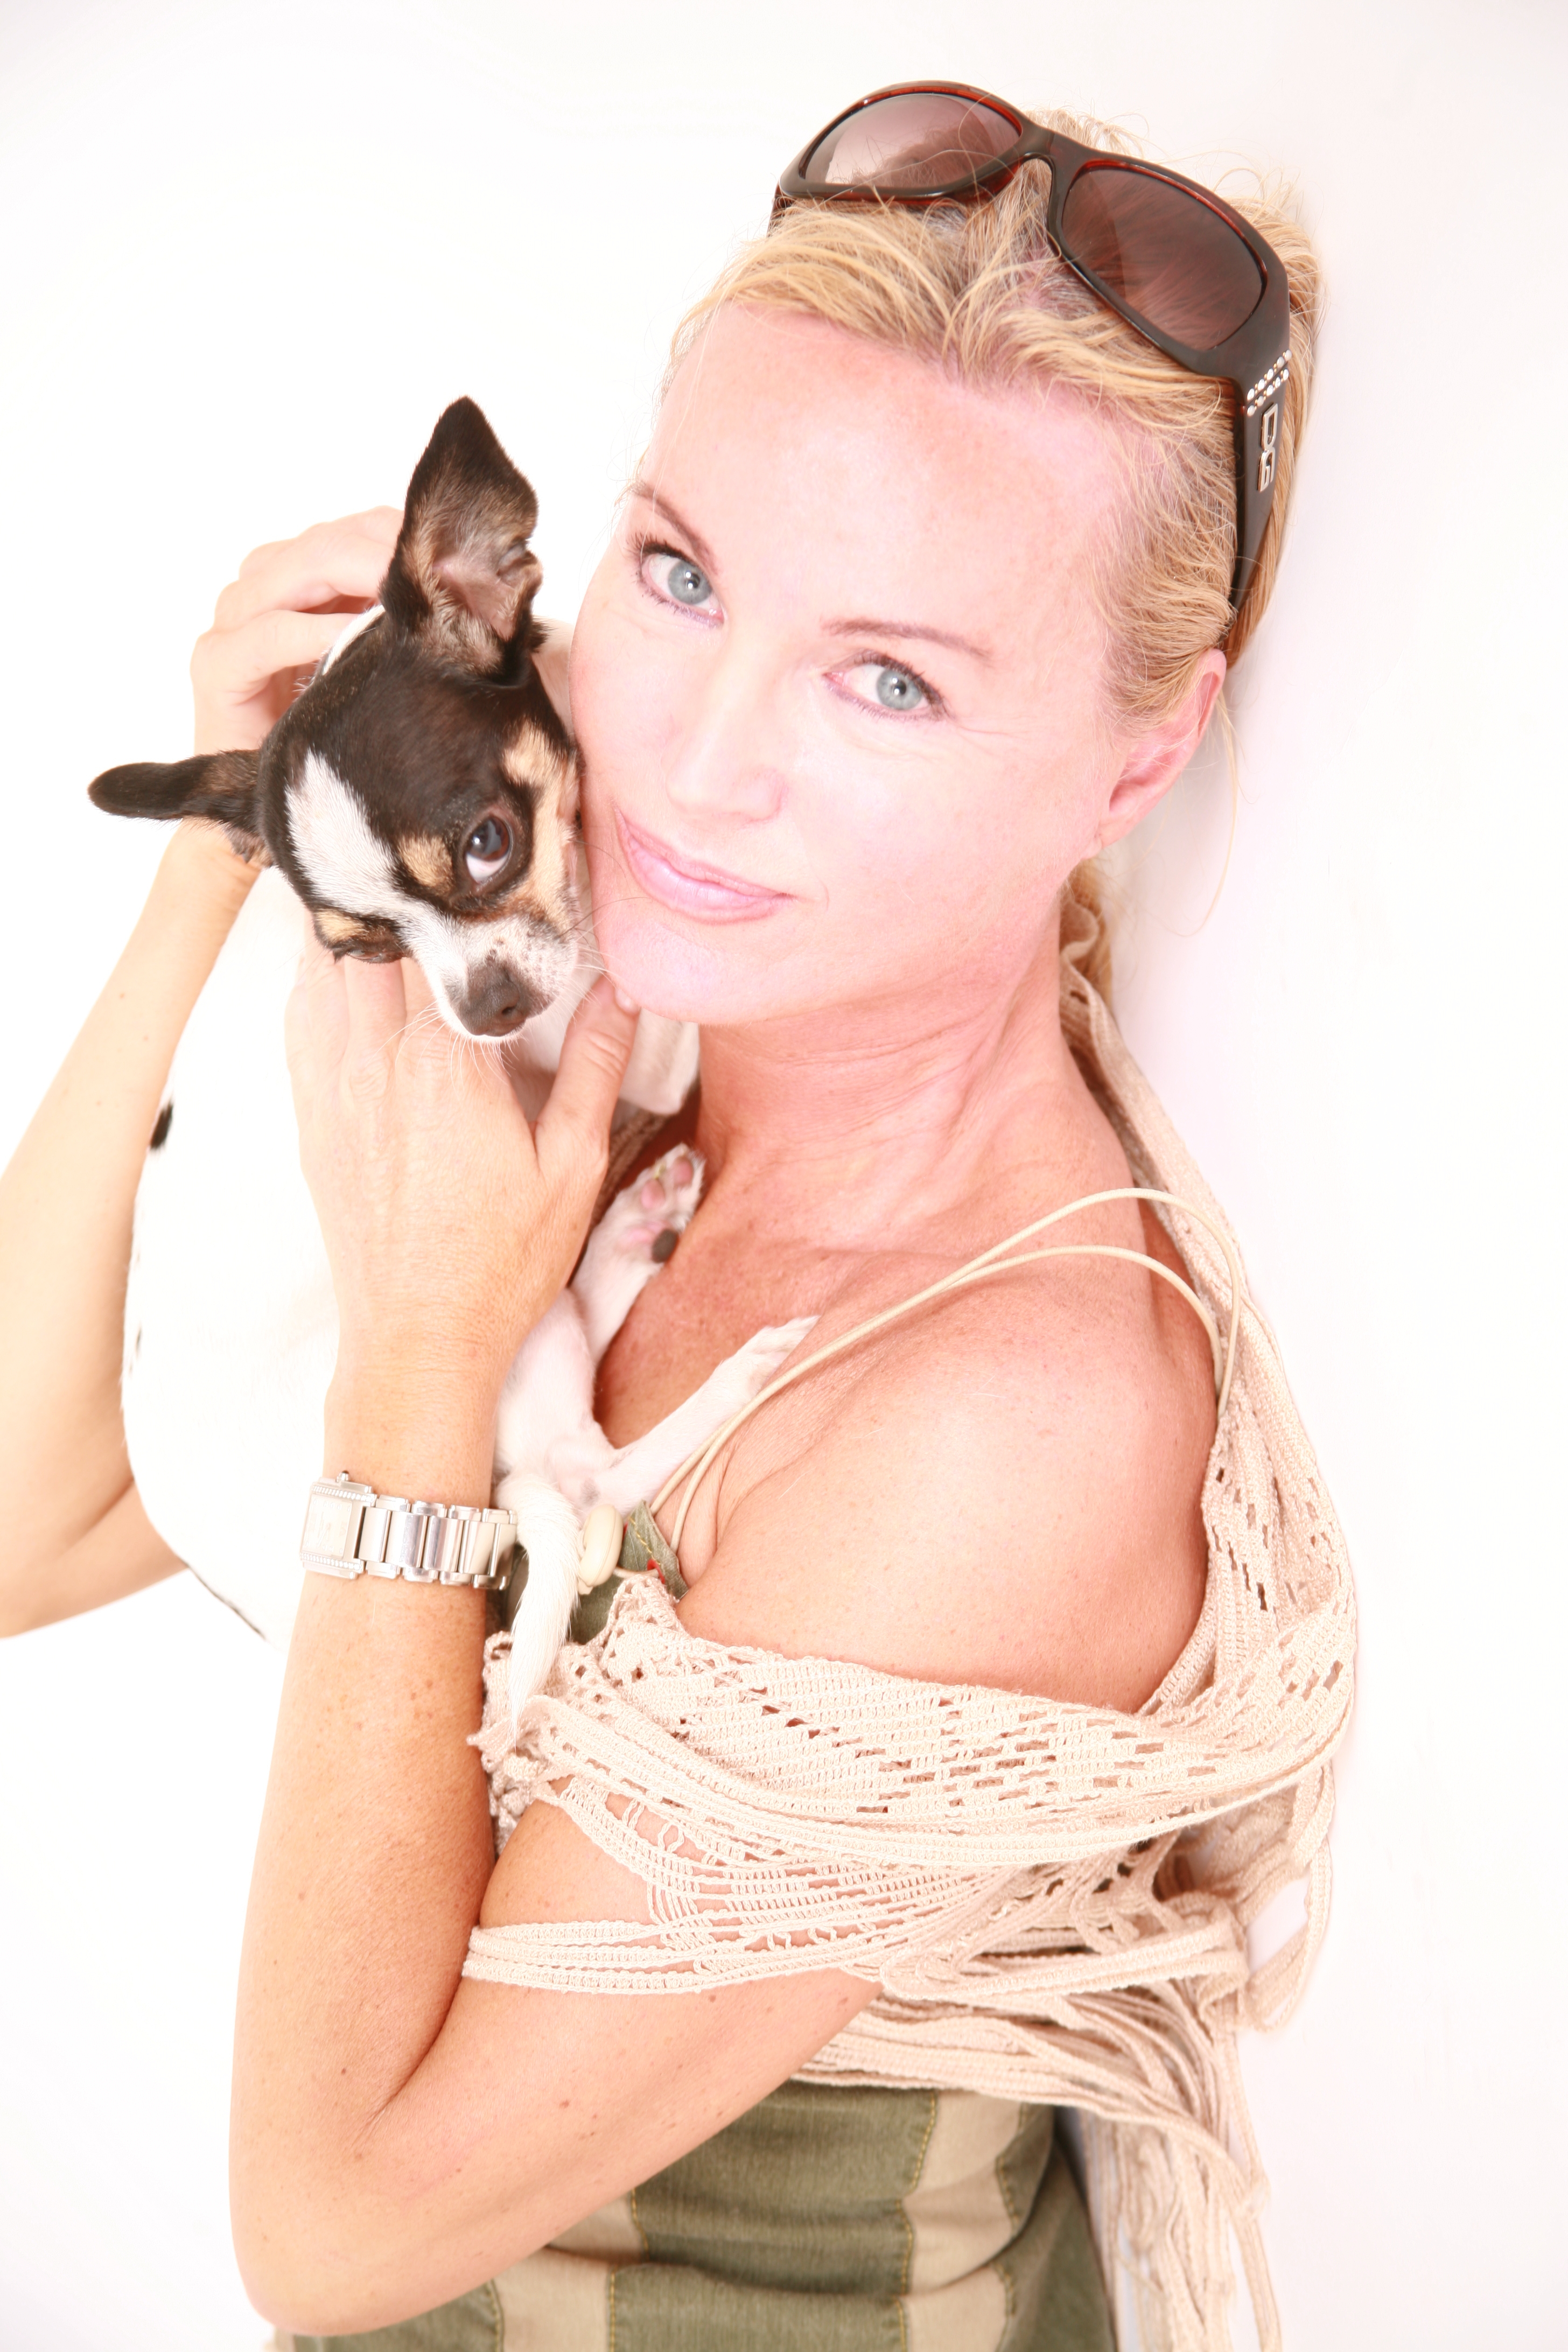 Beatrice de Borg with Mikki for 'The Sun Shines' project